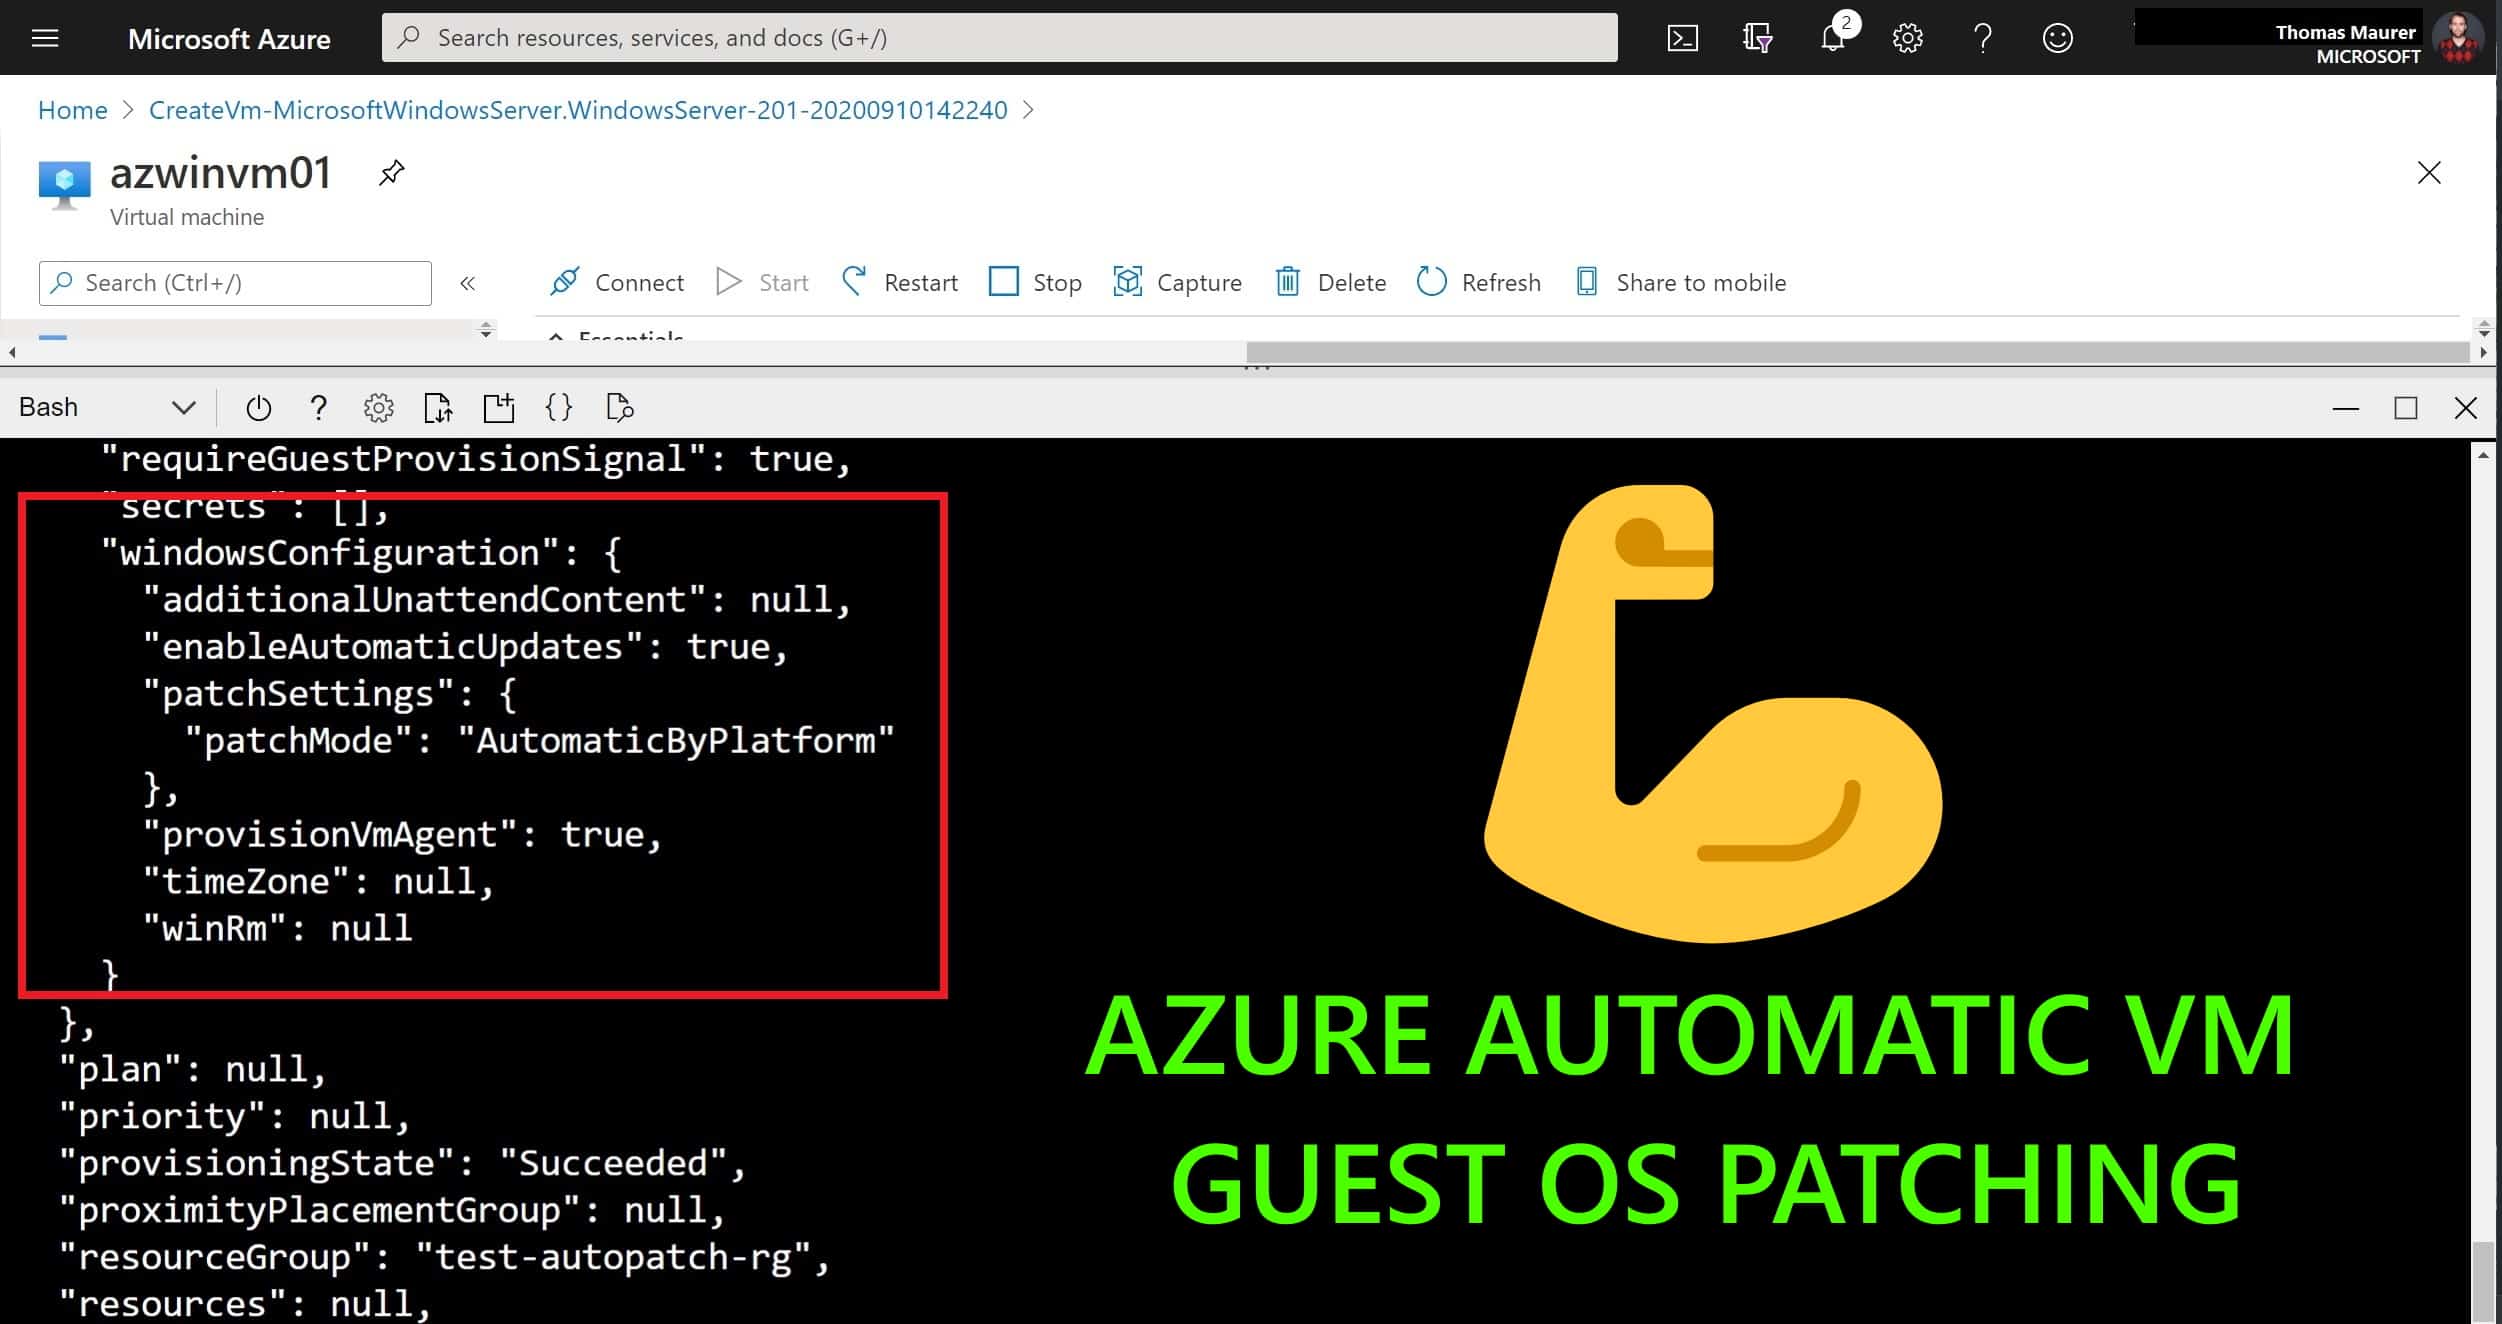 Azure Automatic VM Guest OS Patching